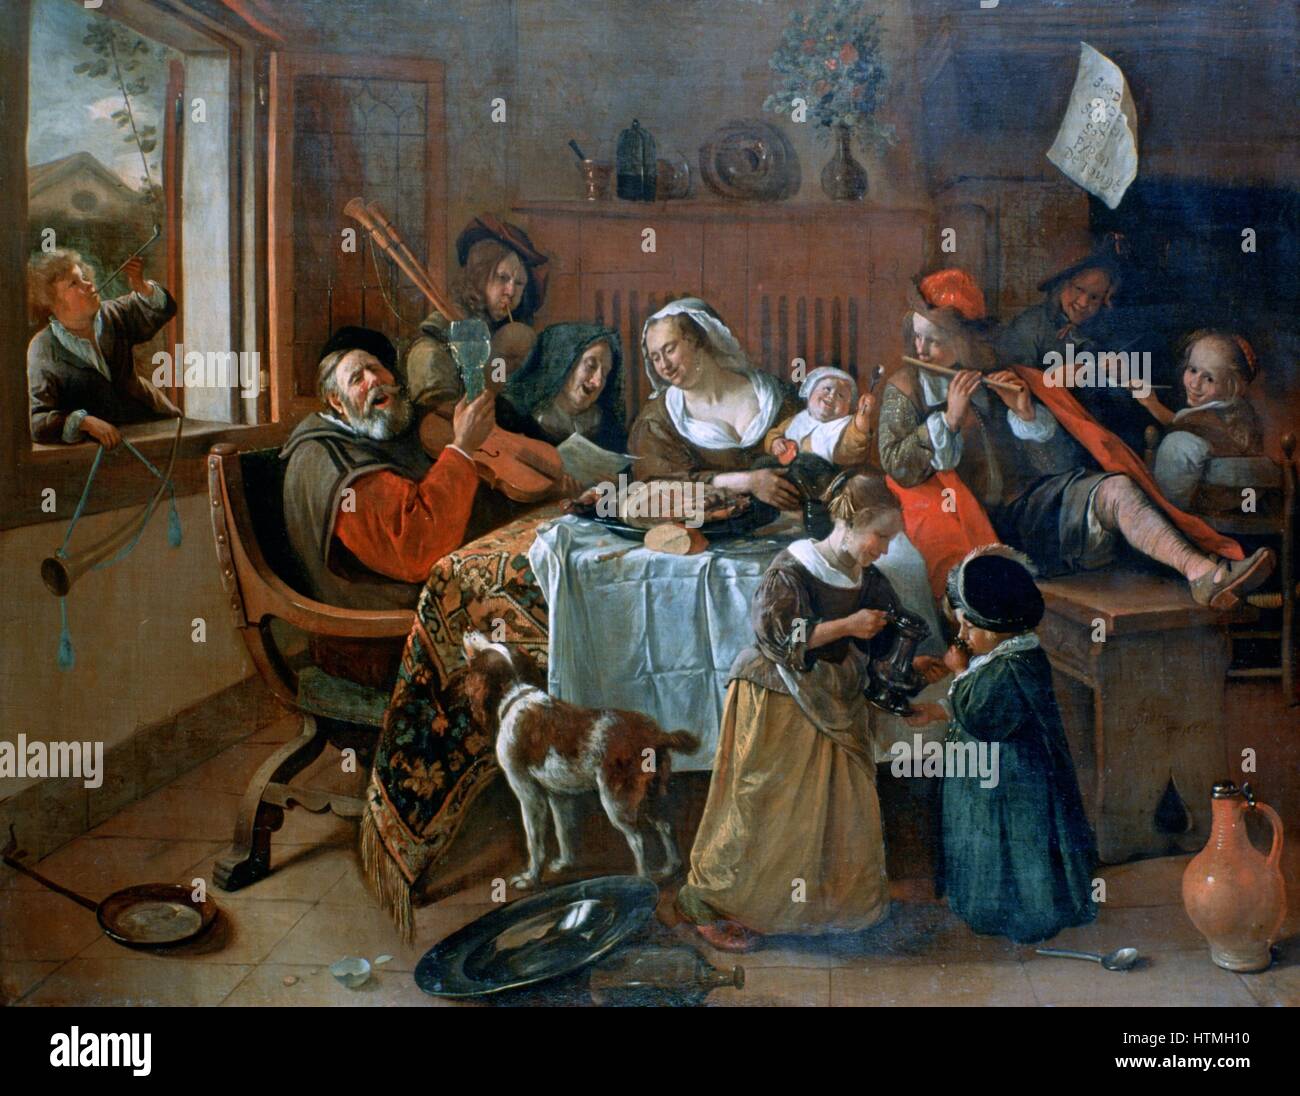 The Merry Family': Dutch interior showing a family making music round a table covered in a carpet and a cloth with the remains of a meal. Even the dog seems to be joining in. The patriarch puts his instrument aside and raises his glass in a toast. The wom Stock Photo